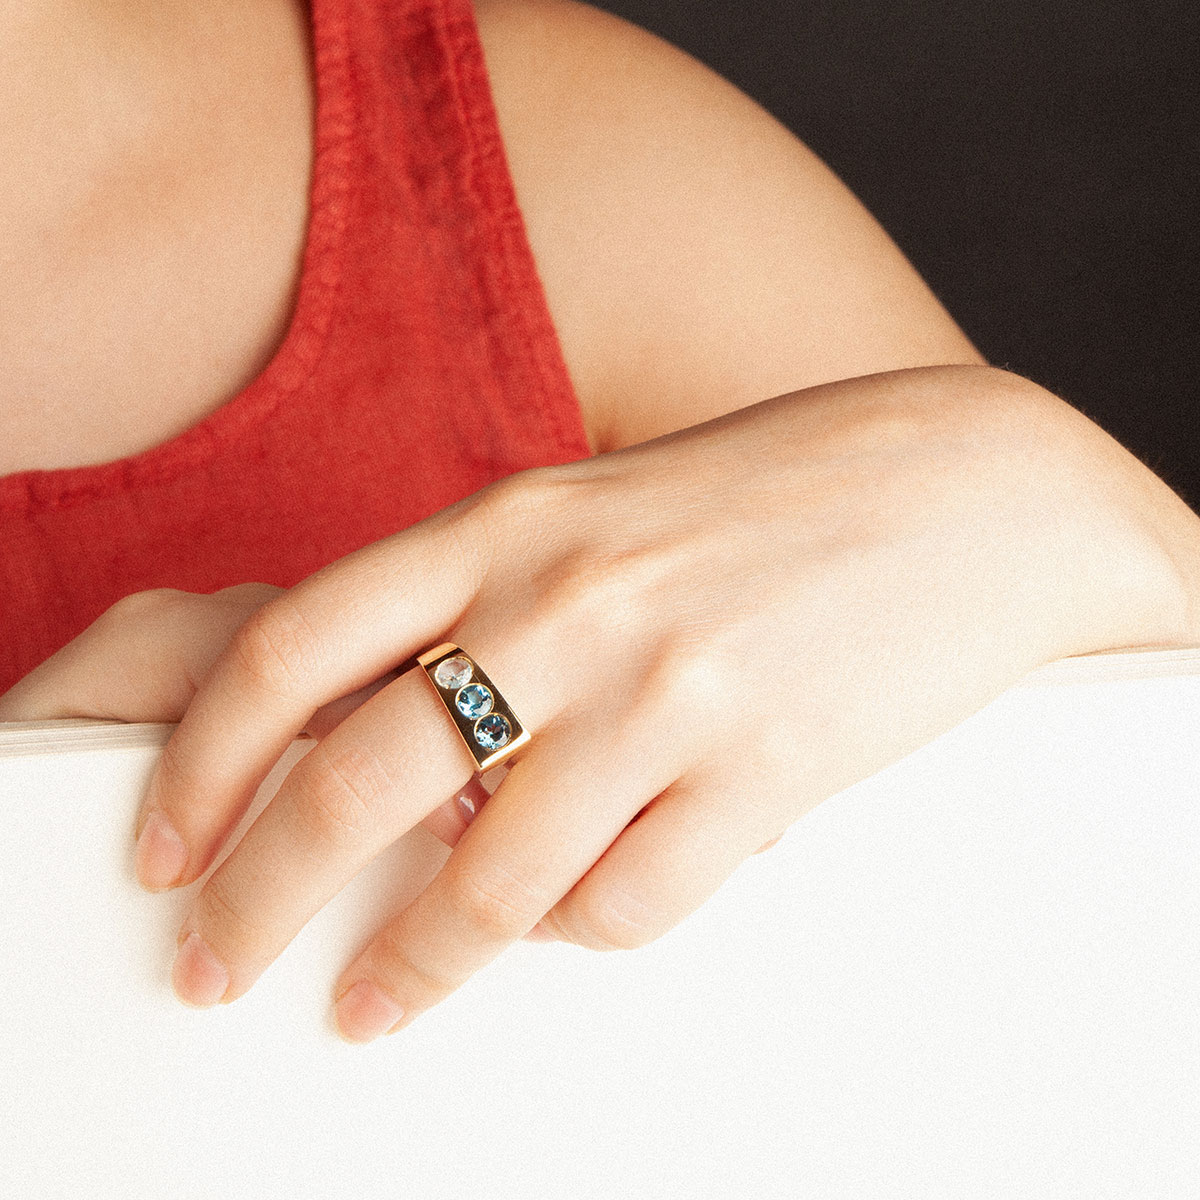 Uca handcrafted ring in 9k or 18k gold, Swiss blue, Sky blue and London blue designed by Belen Bajo m1